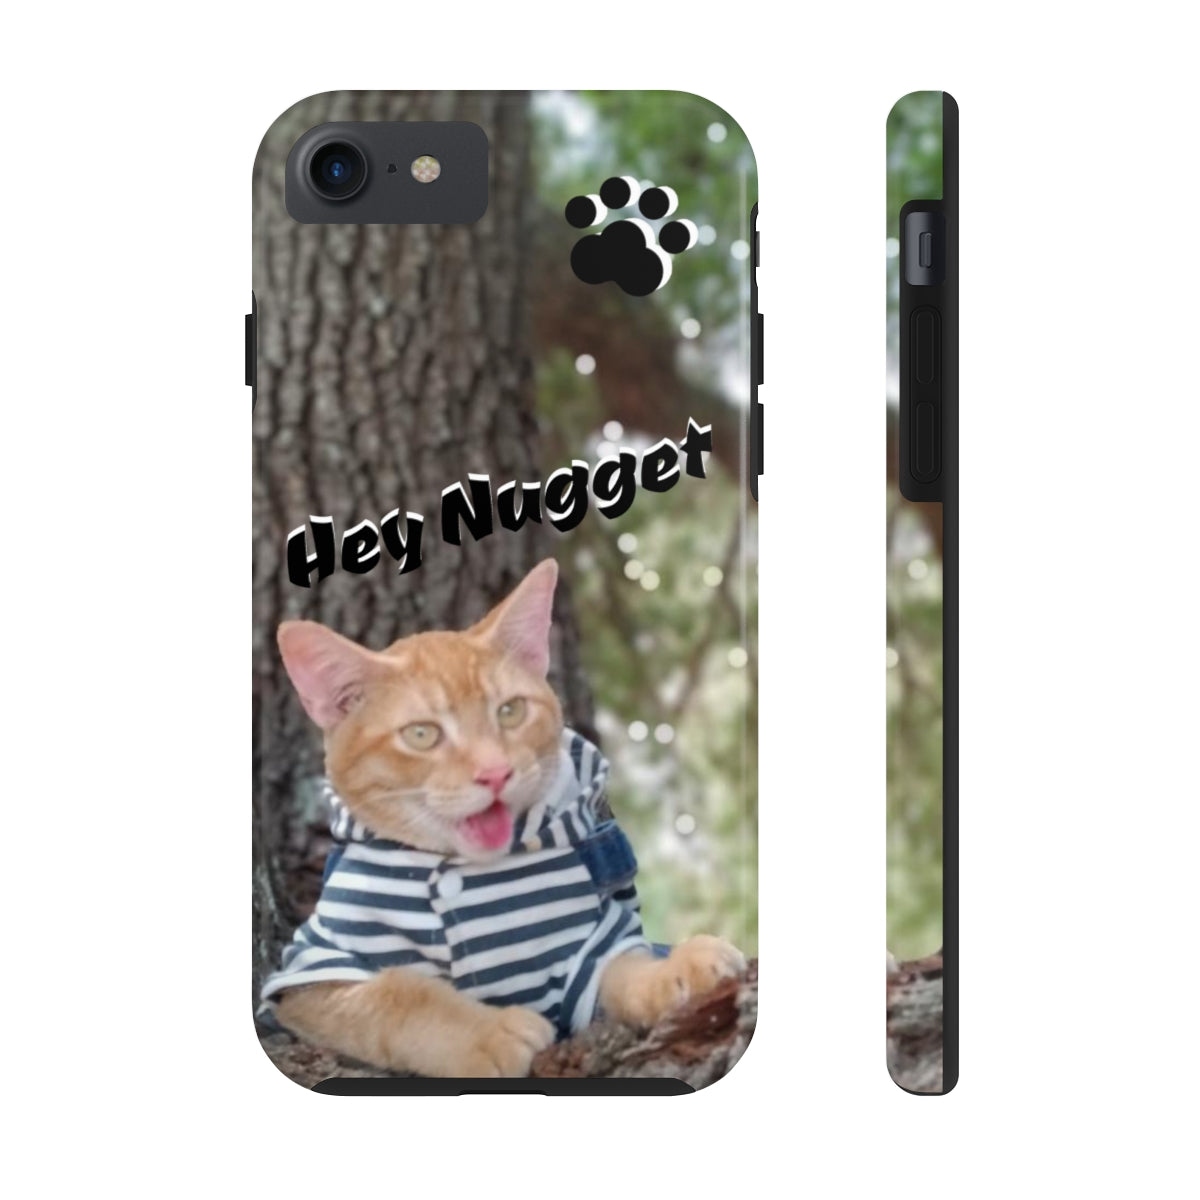 Stand out  with the  Tough Phone Cases, Case-Mate  available at Hey Nugget. Grab yours today!